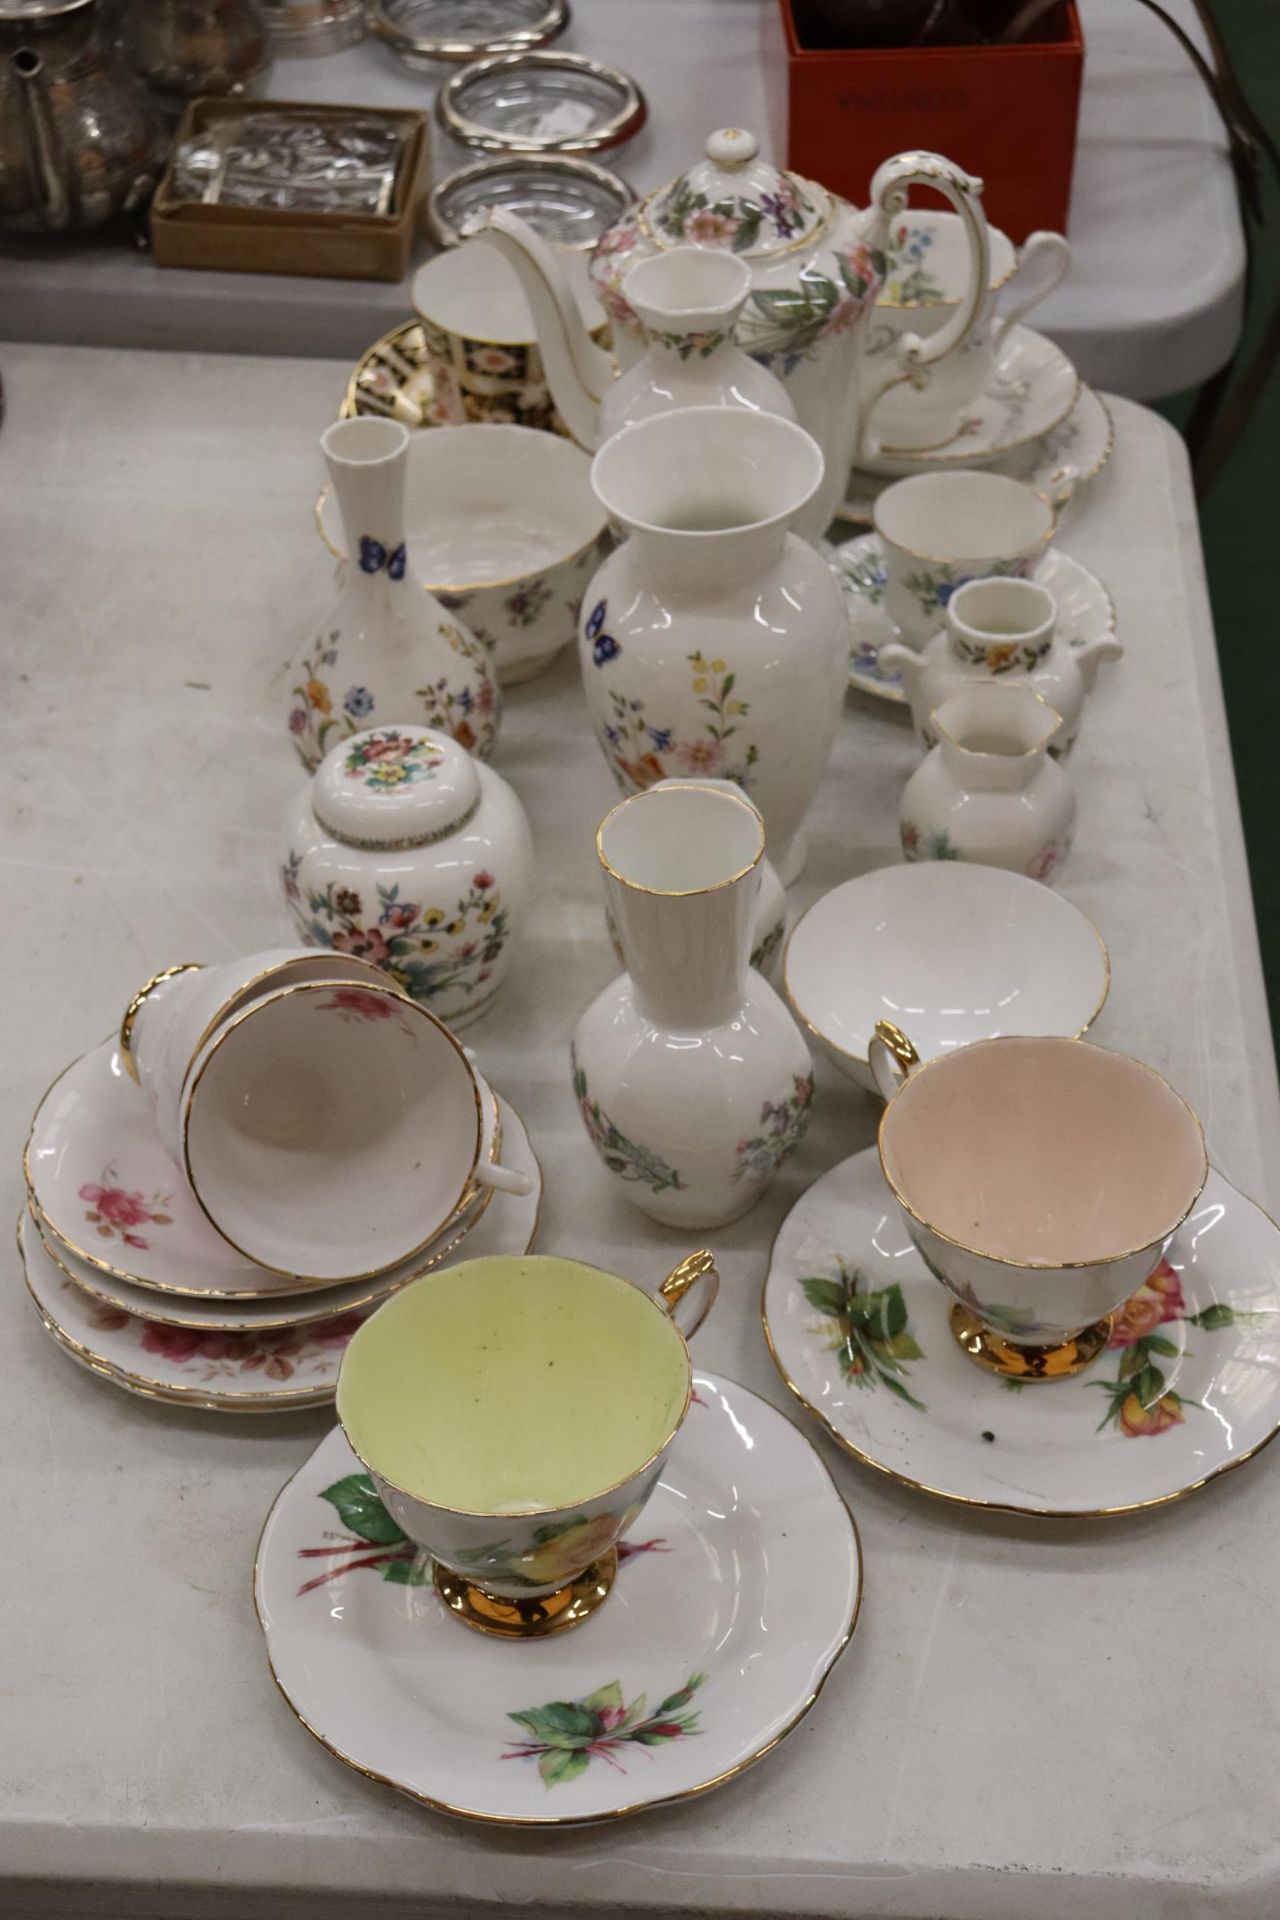 A LARGE QUANTITY OF TEAWARE TO INCLUDE A PARAGON 'COUNTRY LANE', COFFEE POT, 'RENDEZVOUS' CUPS, A